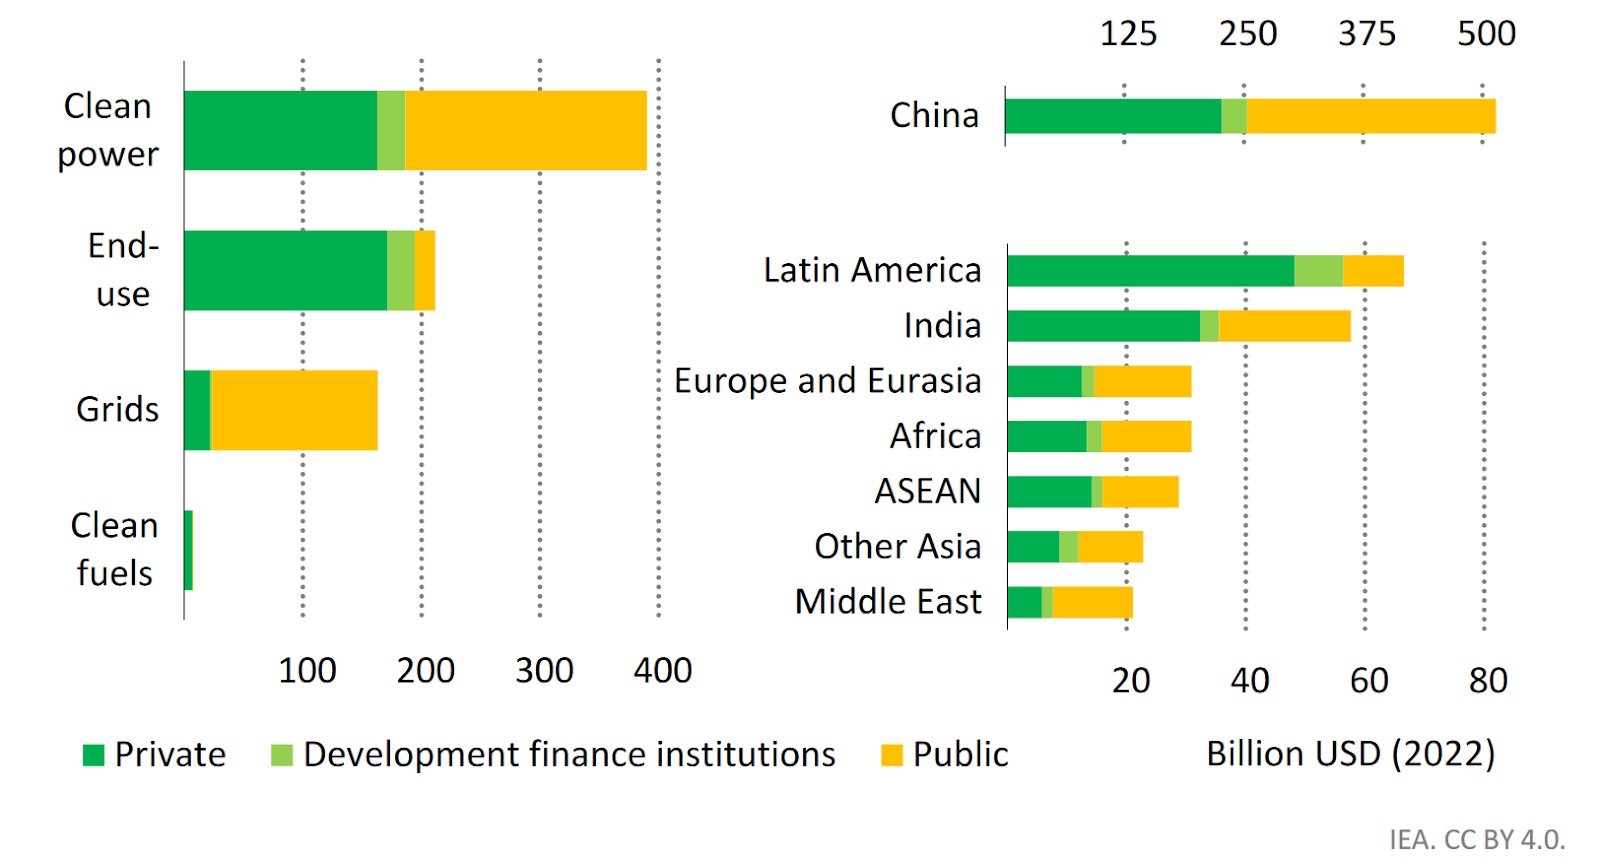 Clean Energy Finance in EMDEs by Public and Private Sources in 2022, Source: IEA